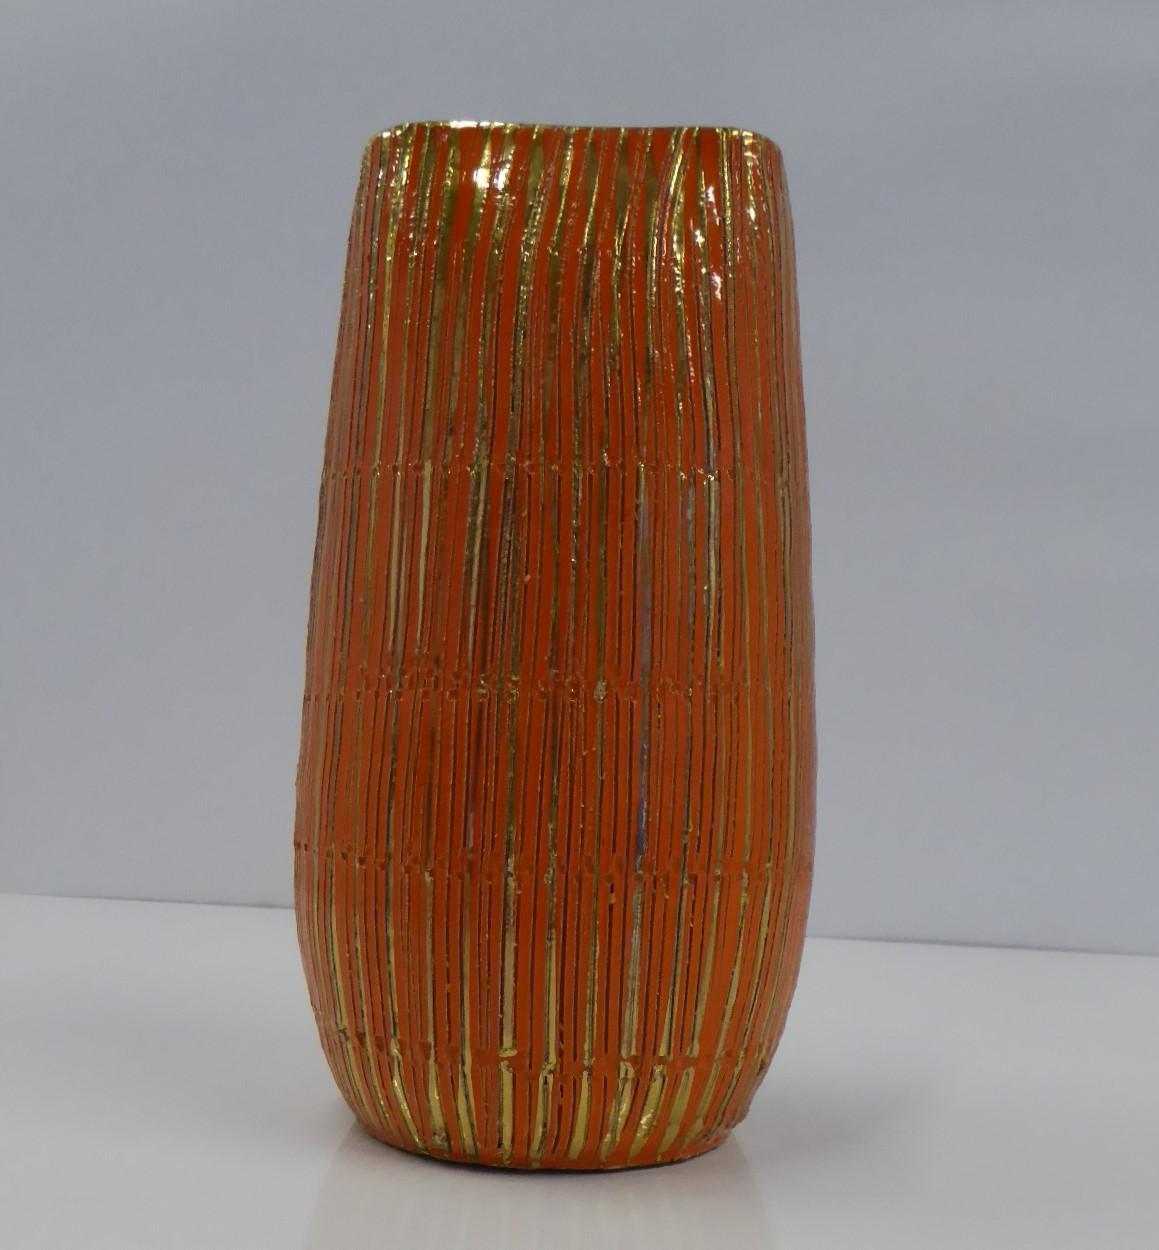 One of Aldo Londi's midcentury creations, his SETA (Silk) Series of Sgraffito Pottery for Bitossi in fun vibrant orange glaze and gold gilt. A lovely handmade striated vase with bands incised with small uneven shapes. The gold gilt stripes have been